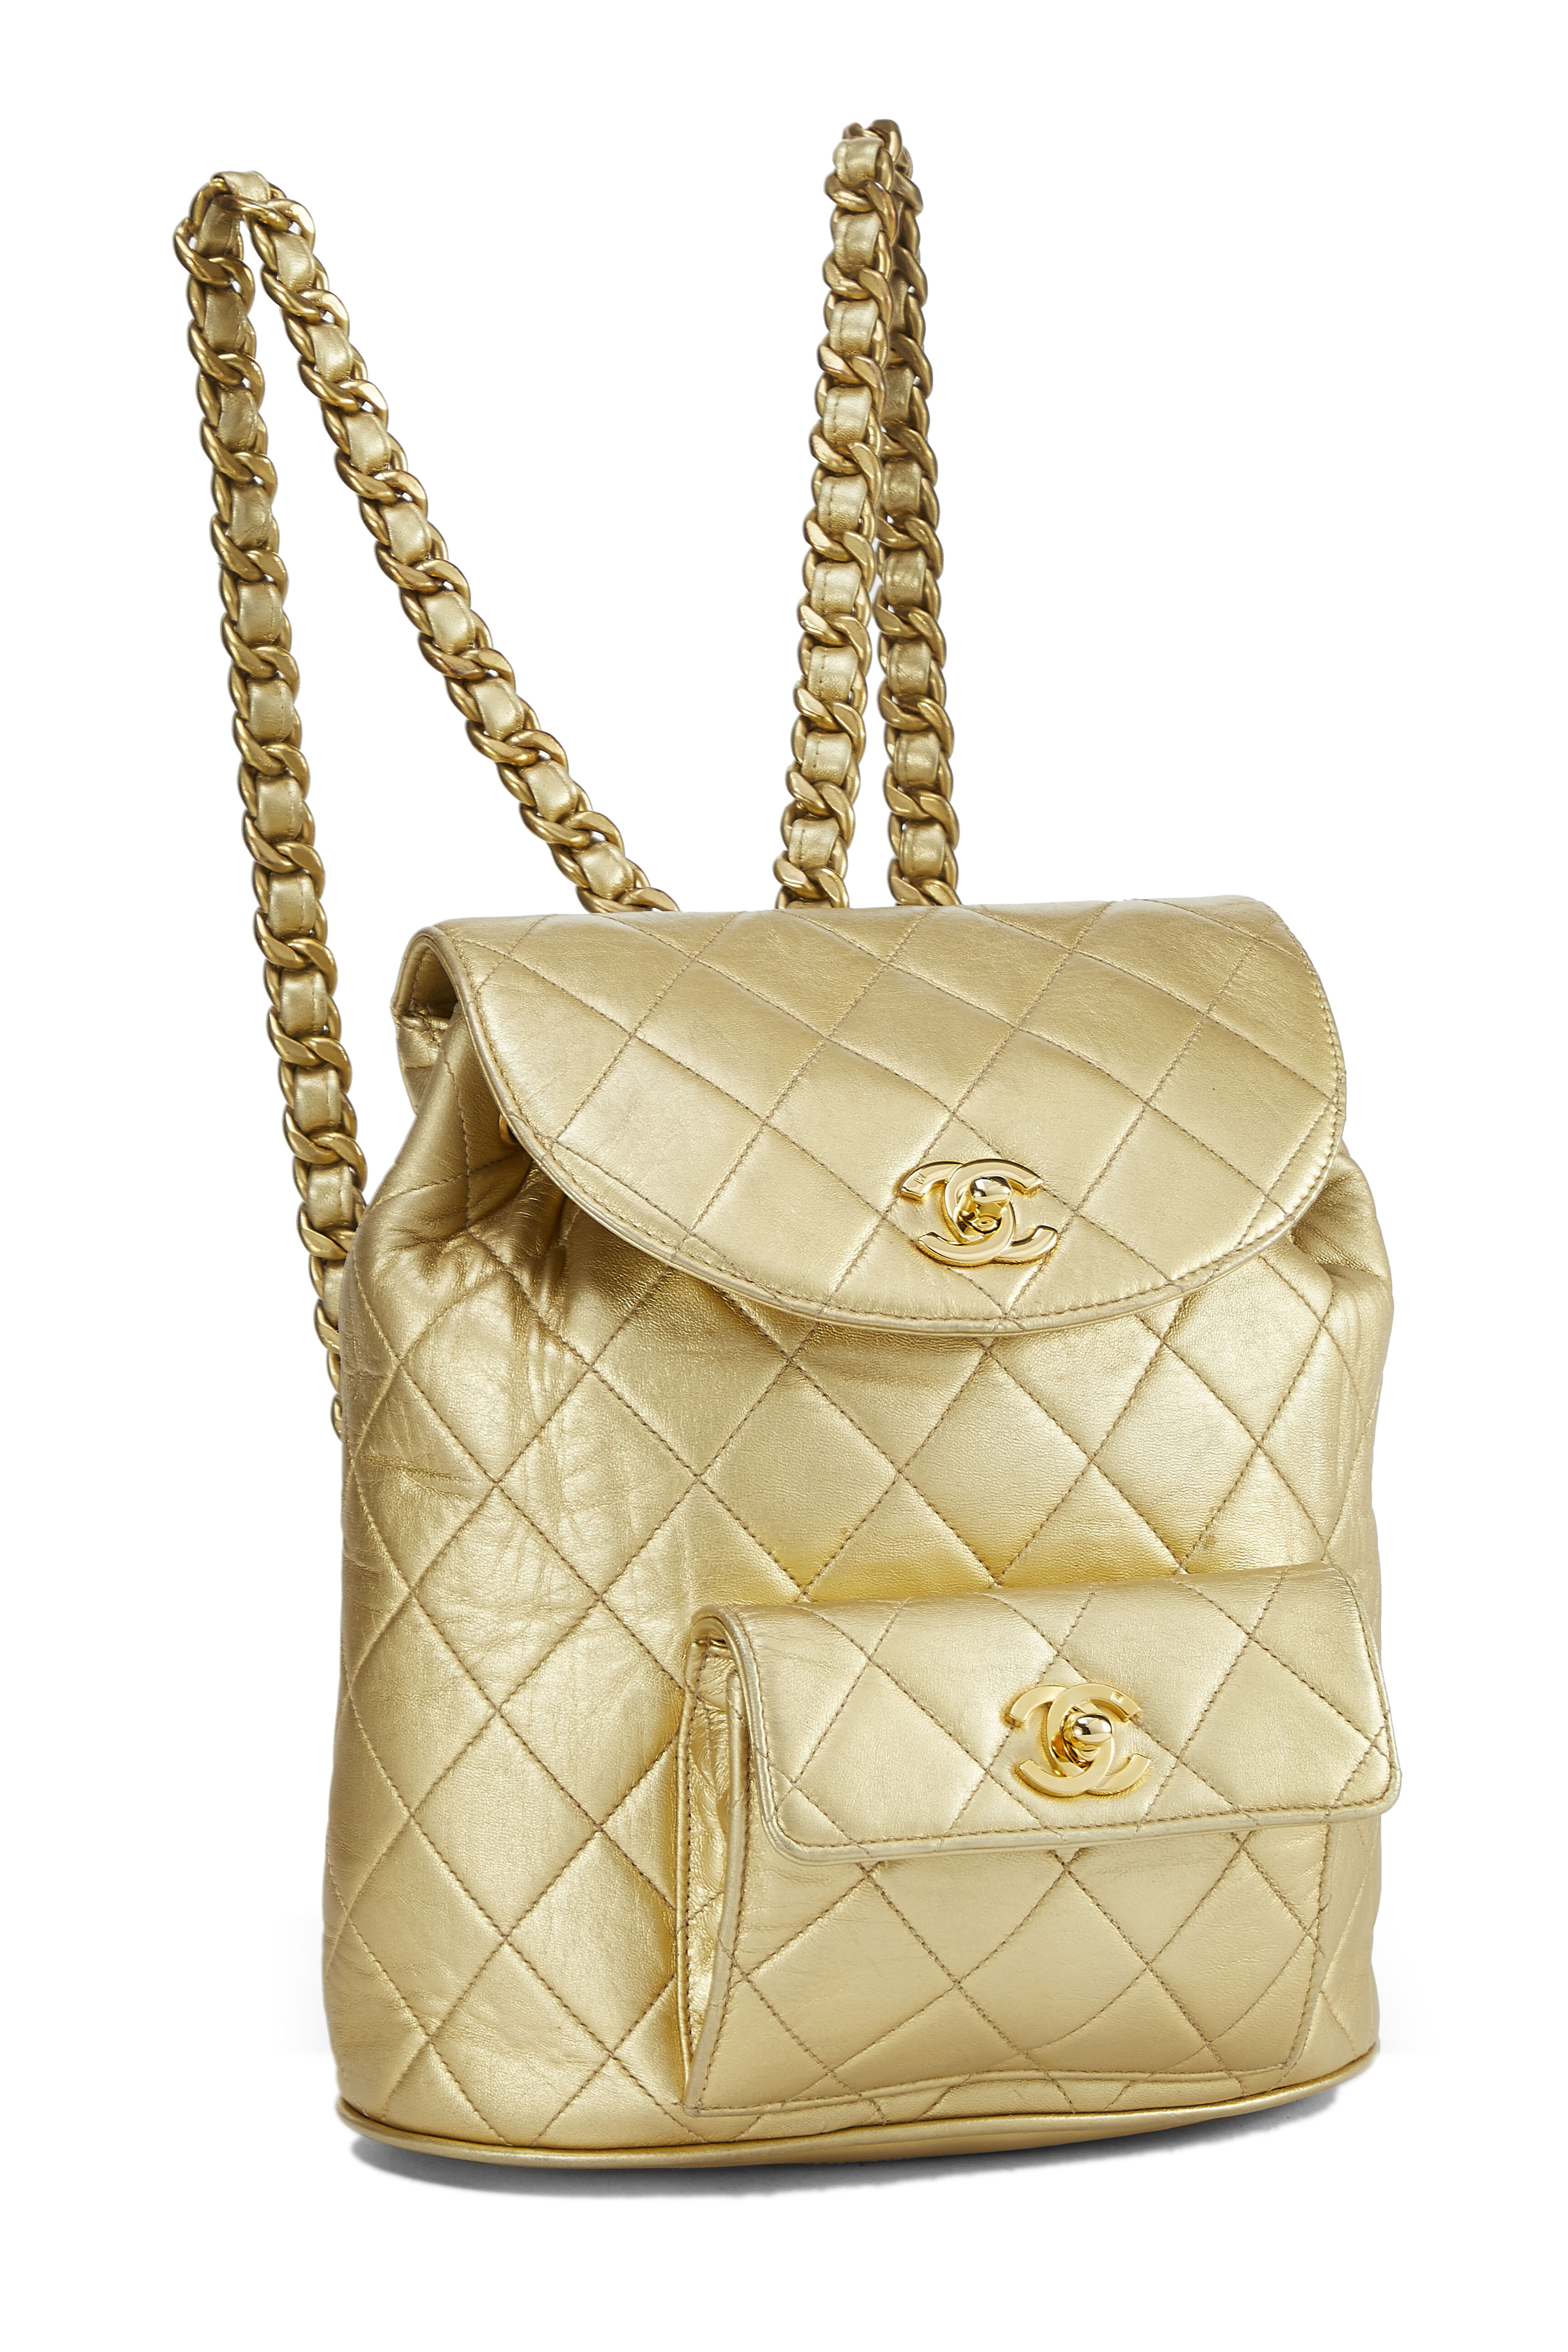 CHANEL Metallic Lambskin Quilted Mini Square Flap Gold 1292581